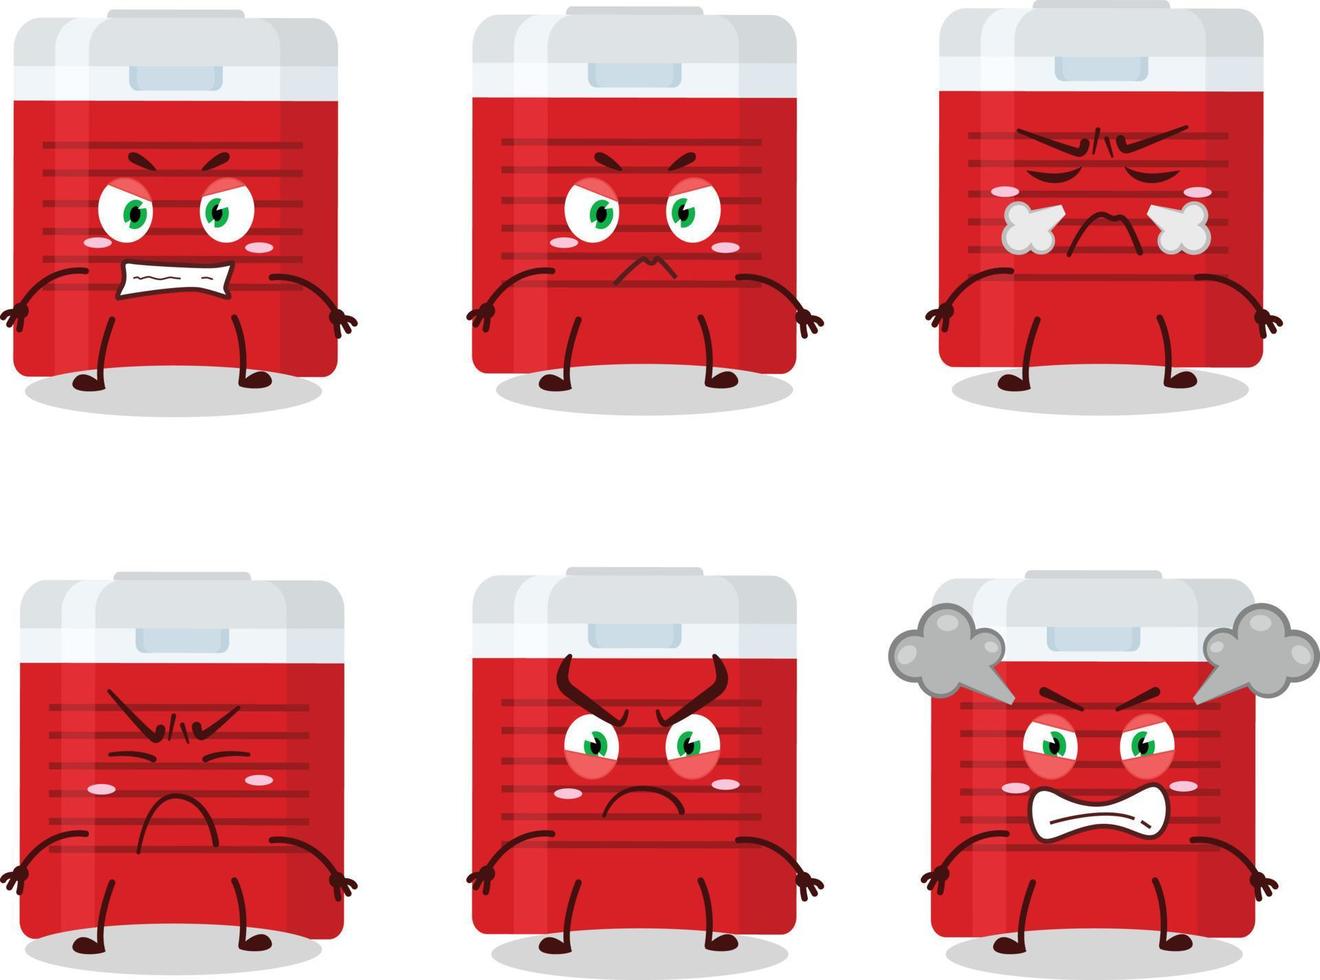 Ice cooler cartoon character with various angry expressions vector